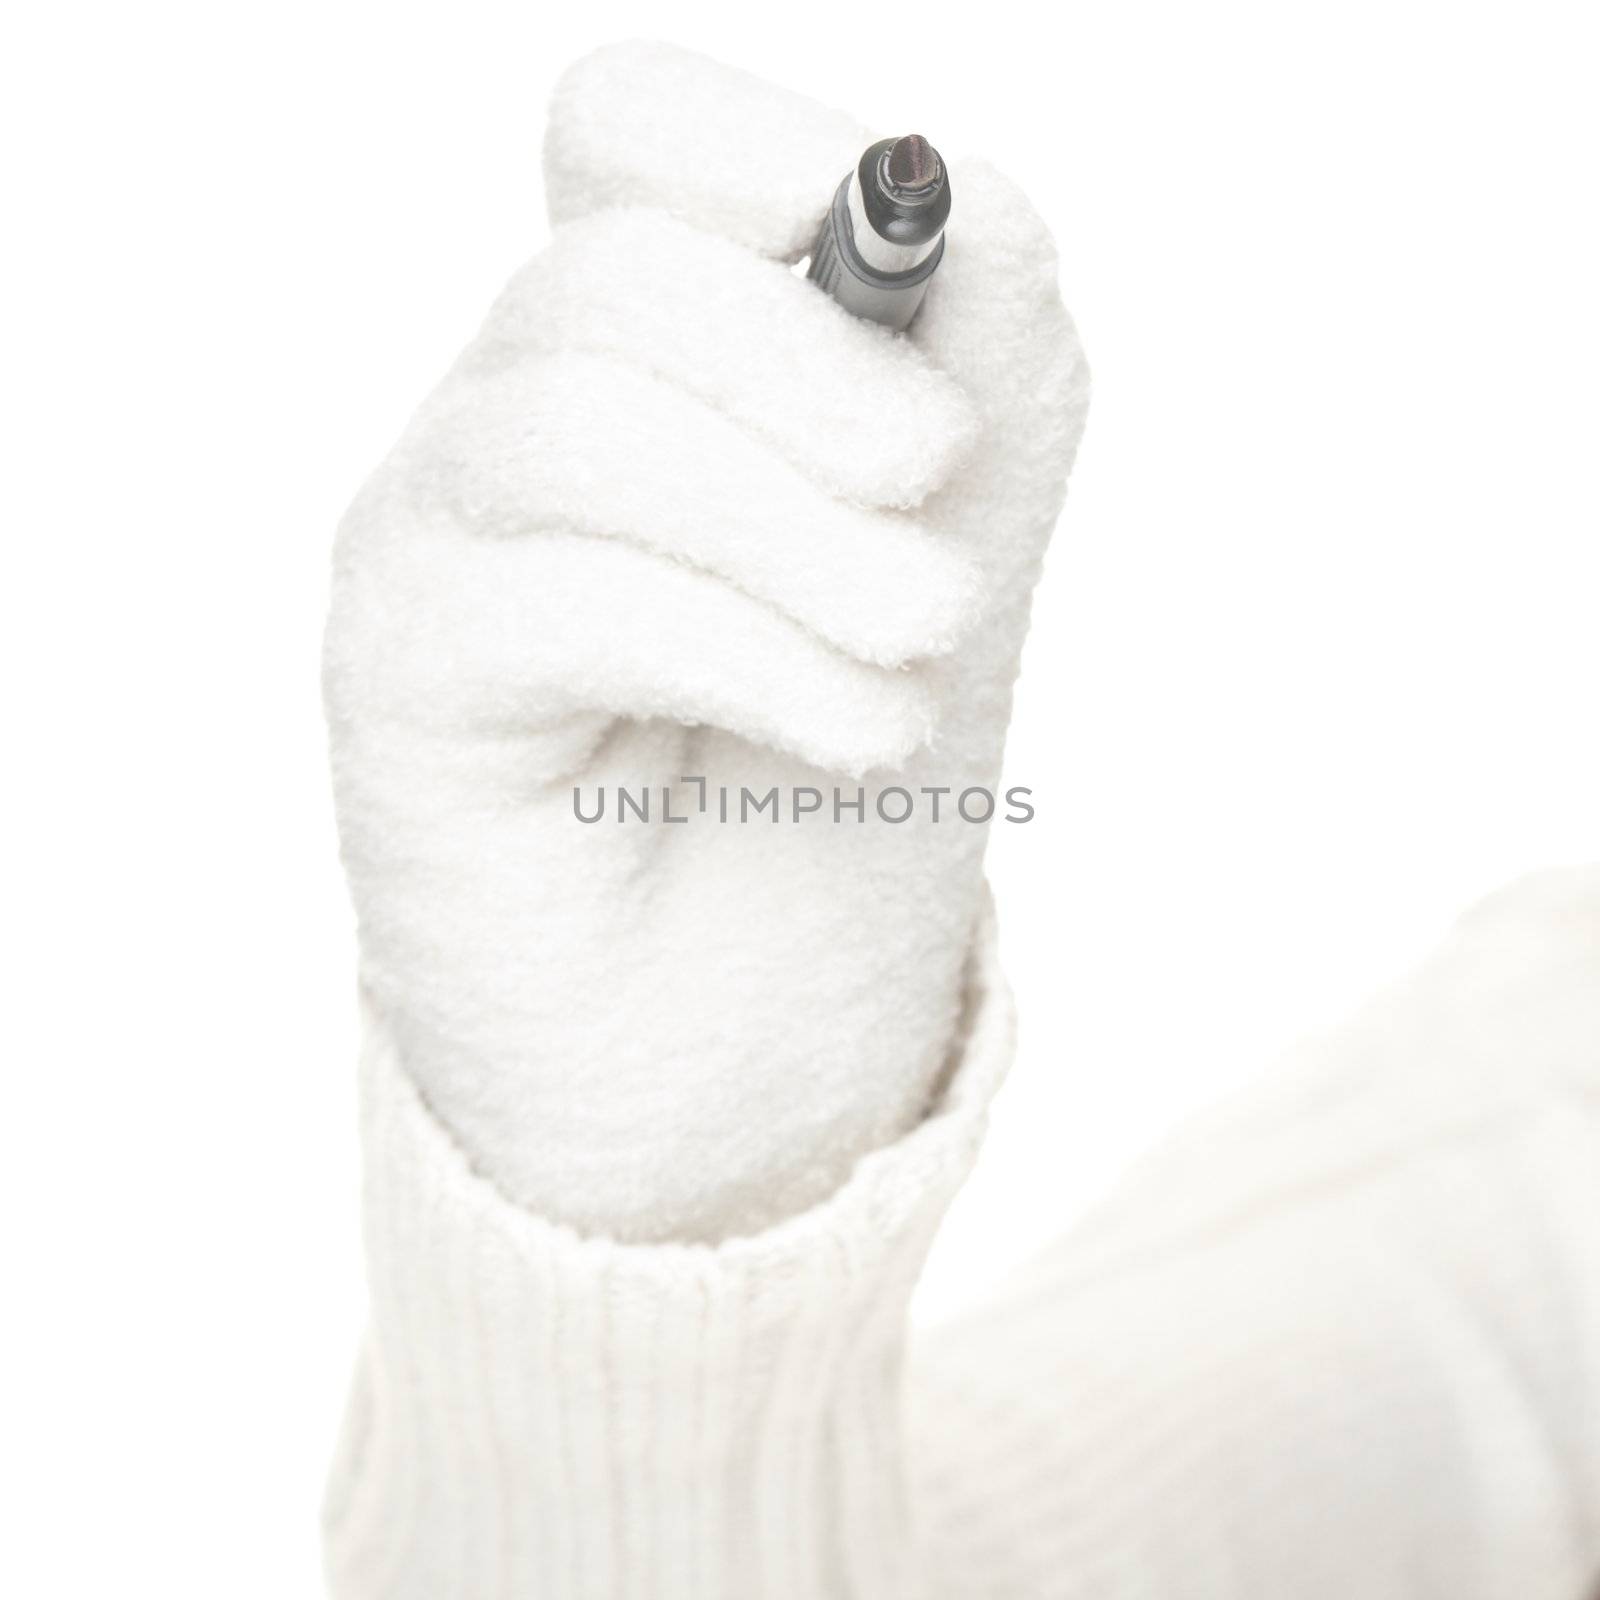 Hand in white glove drawing / writing with pen isolated on white background.